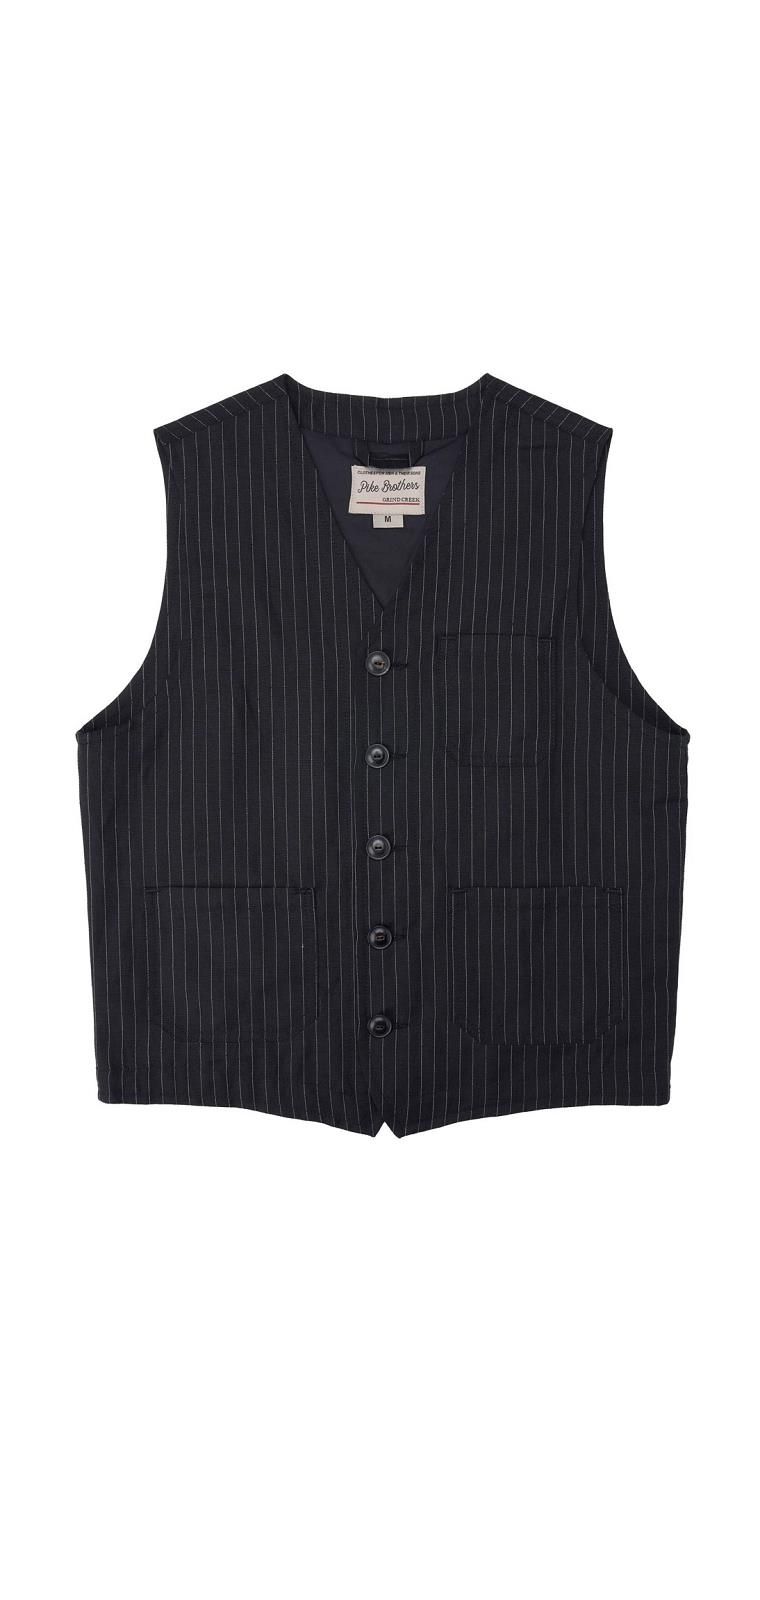 Pike Brothers 1937 Roamer Vest Chicago Black - Kings & Queens